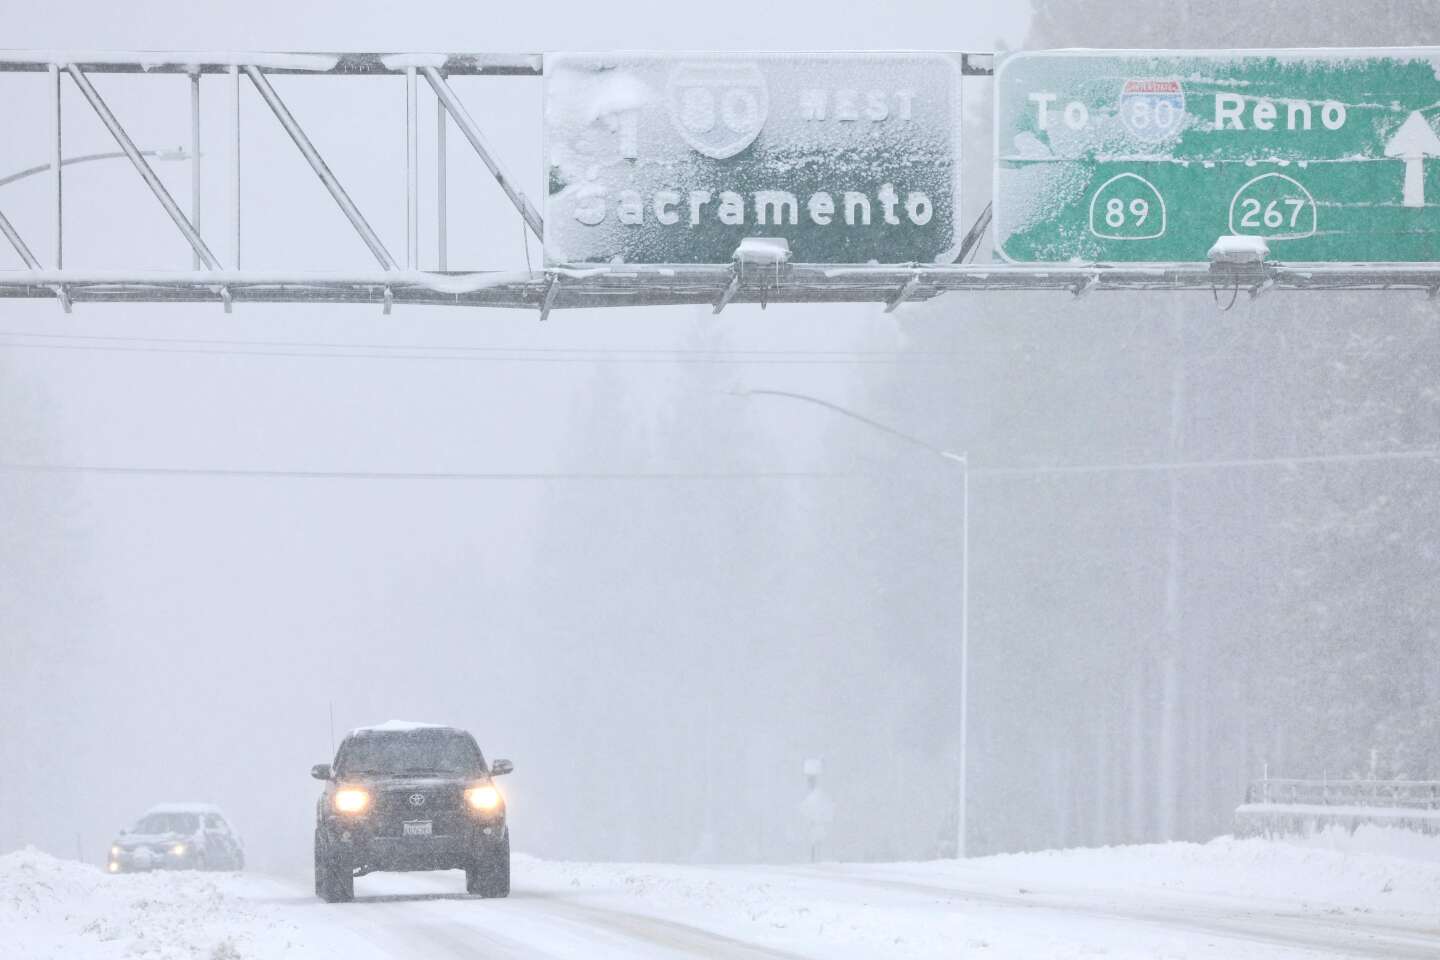 A monster blizzard is expected to bring 10 feet of snow to California and Nevada mountains